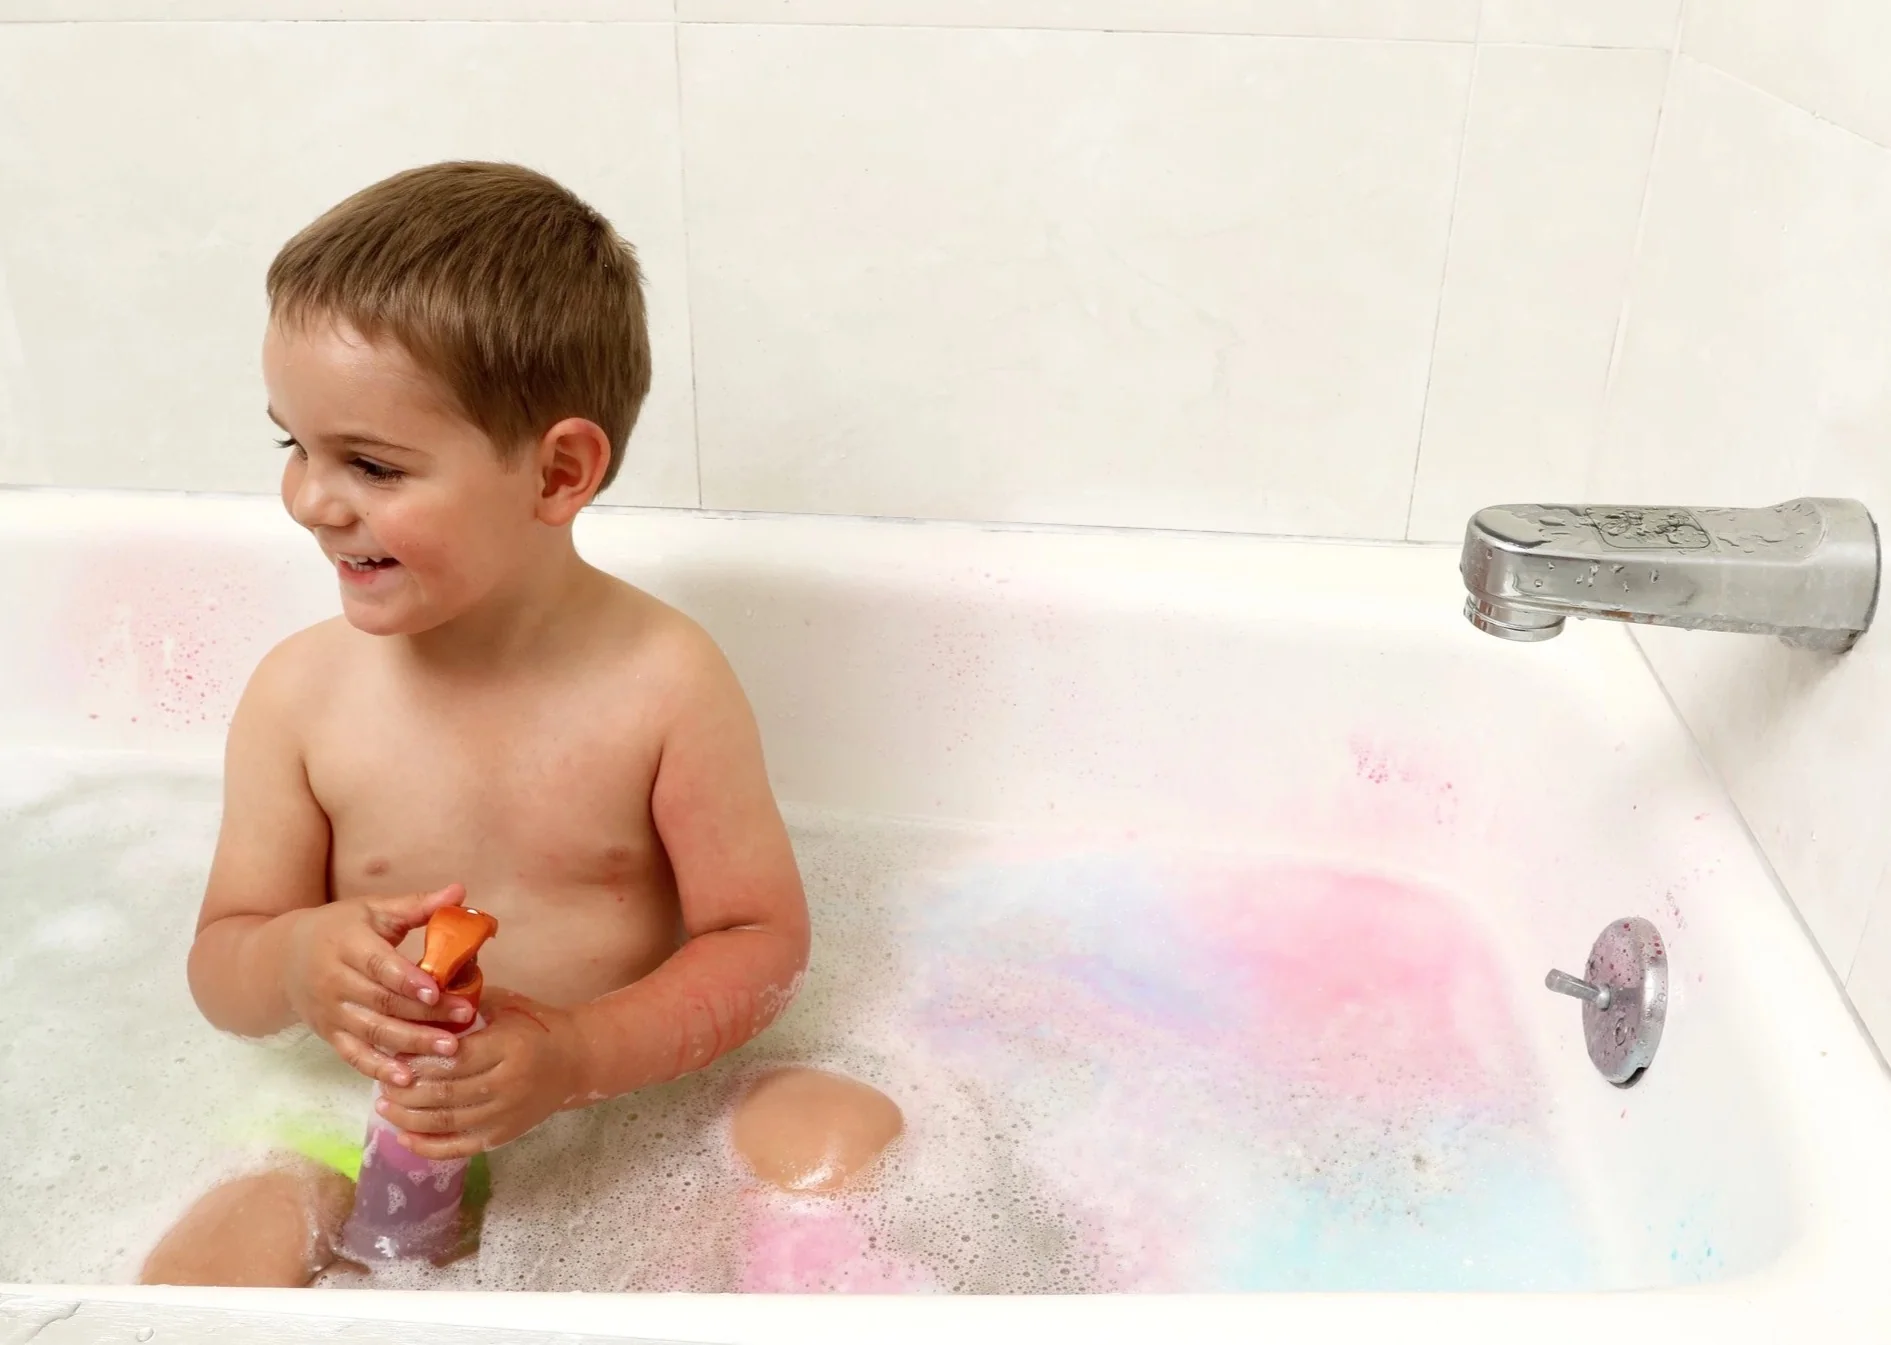 How To Disinfect Bath Toys After Poop